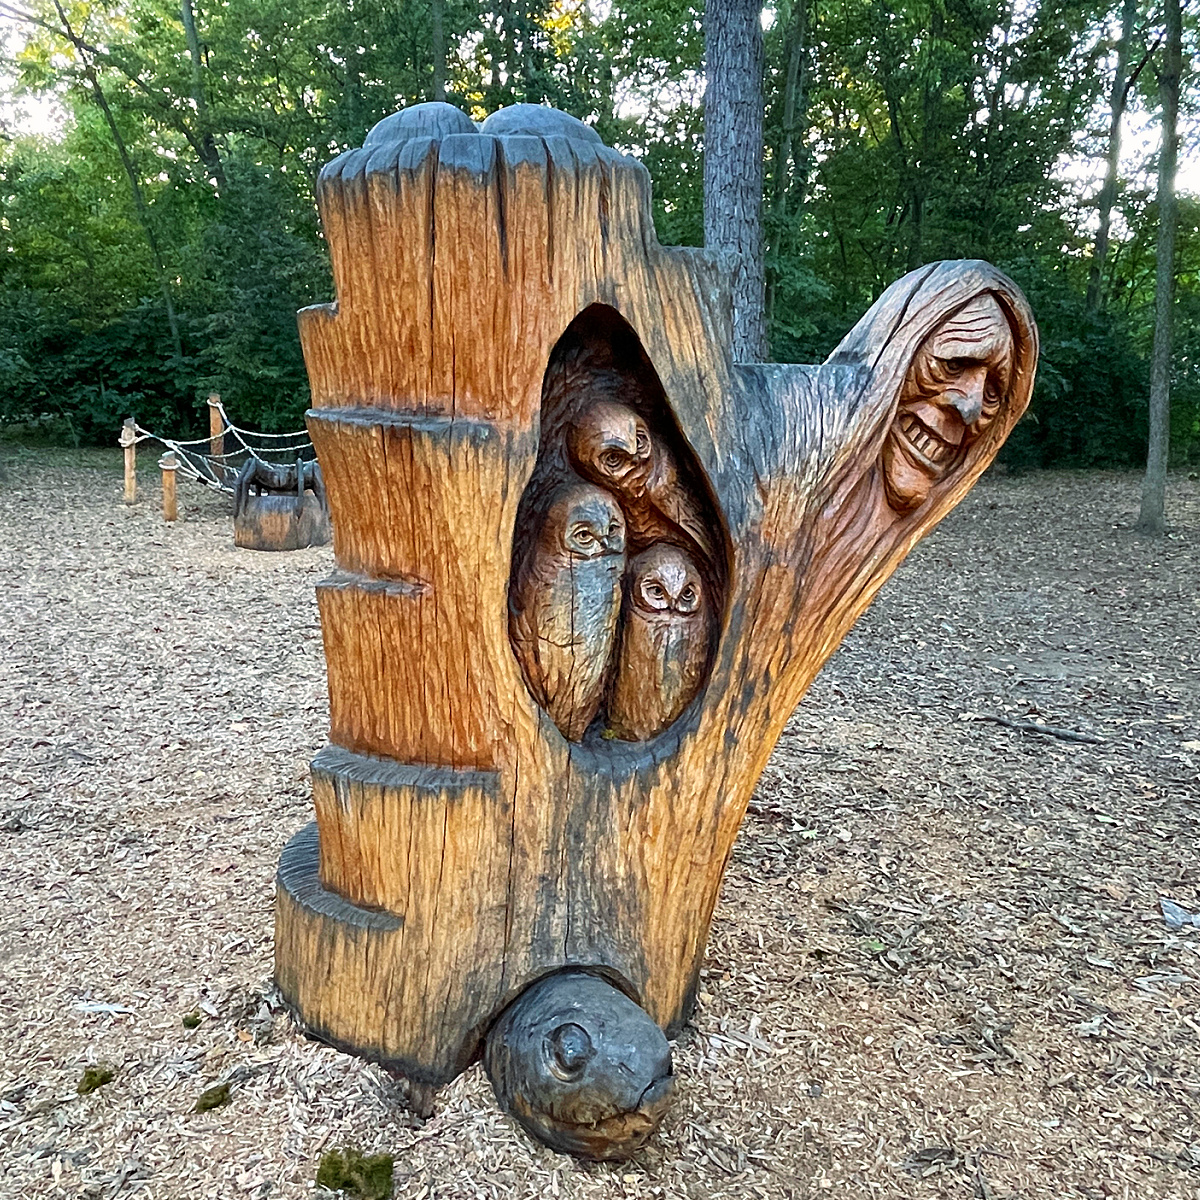 Mythical Woods Play Area